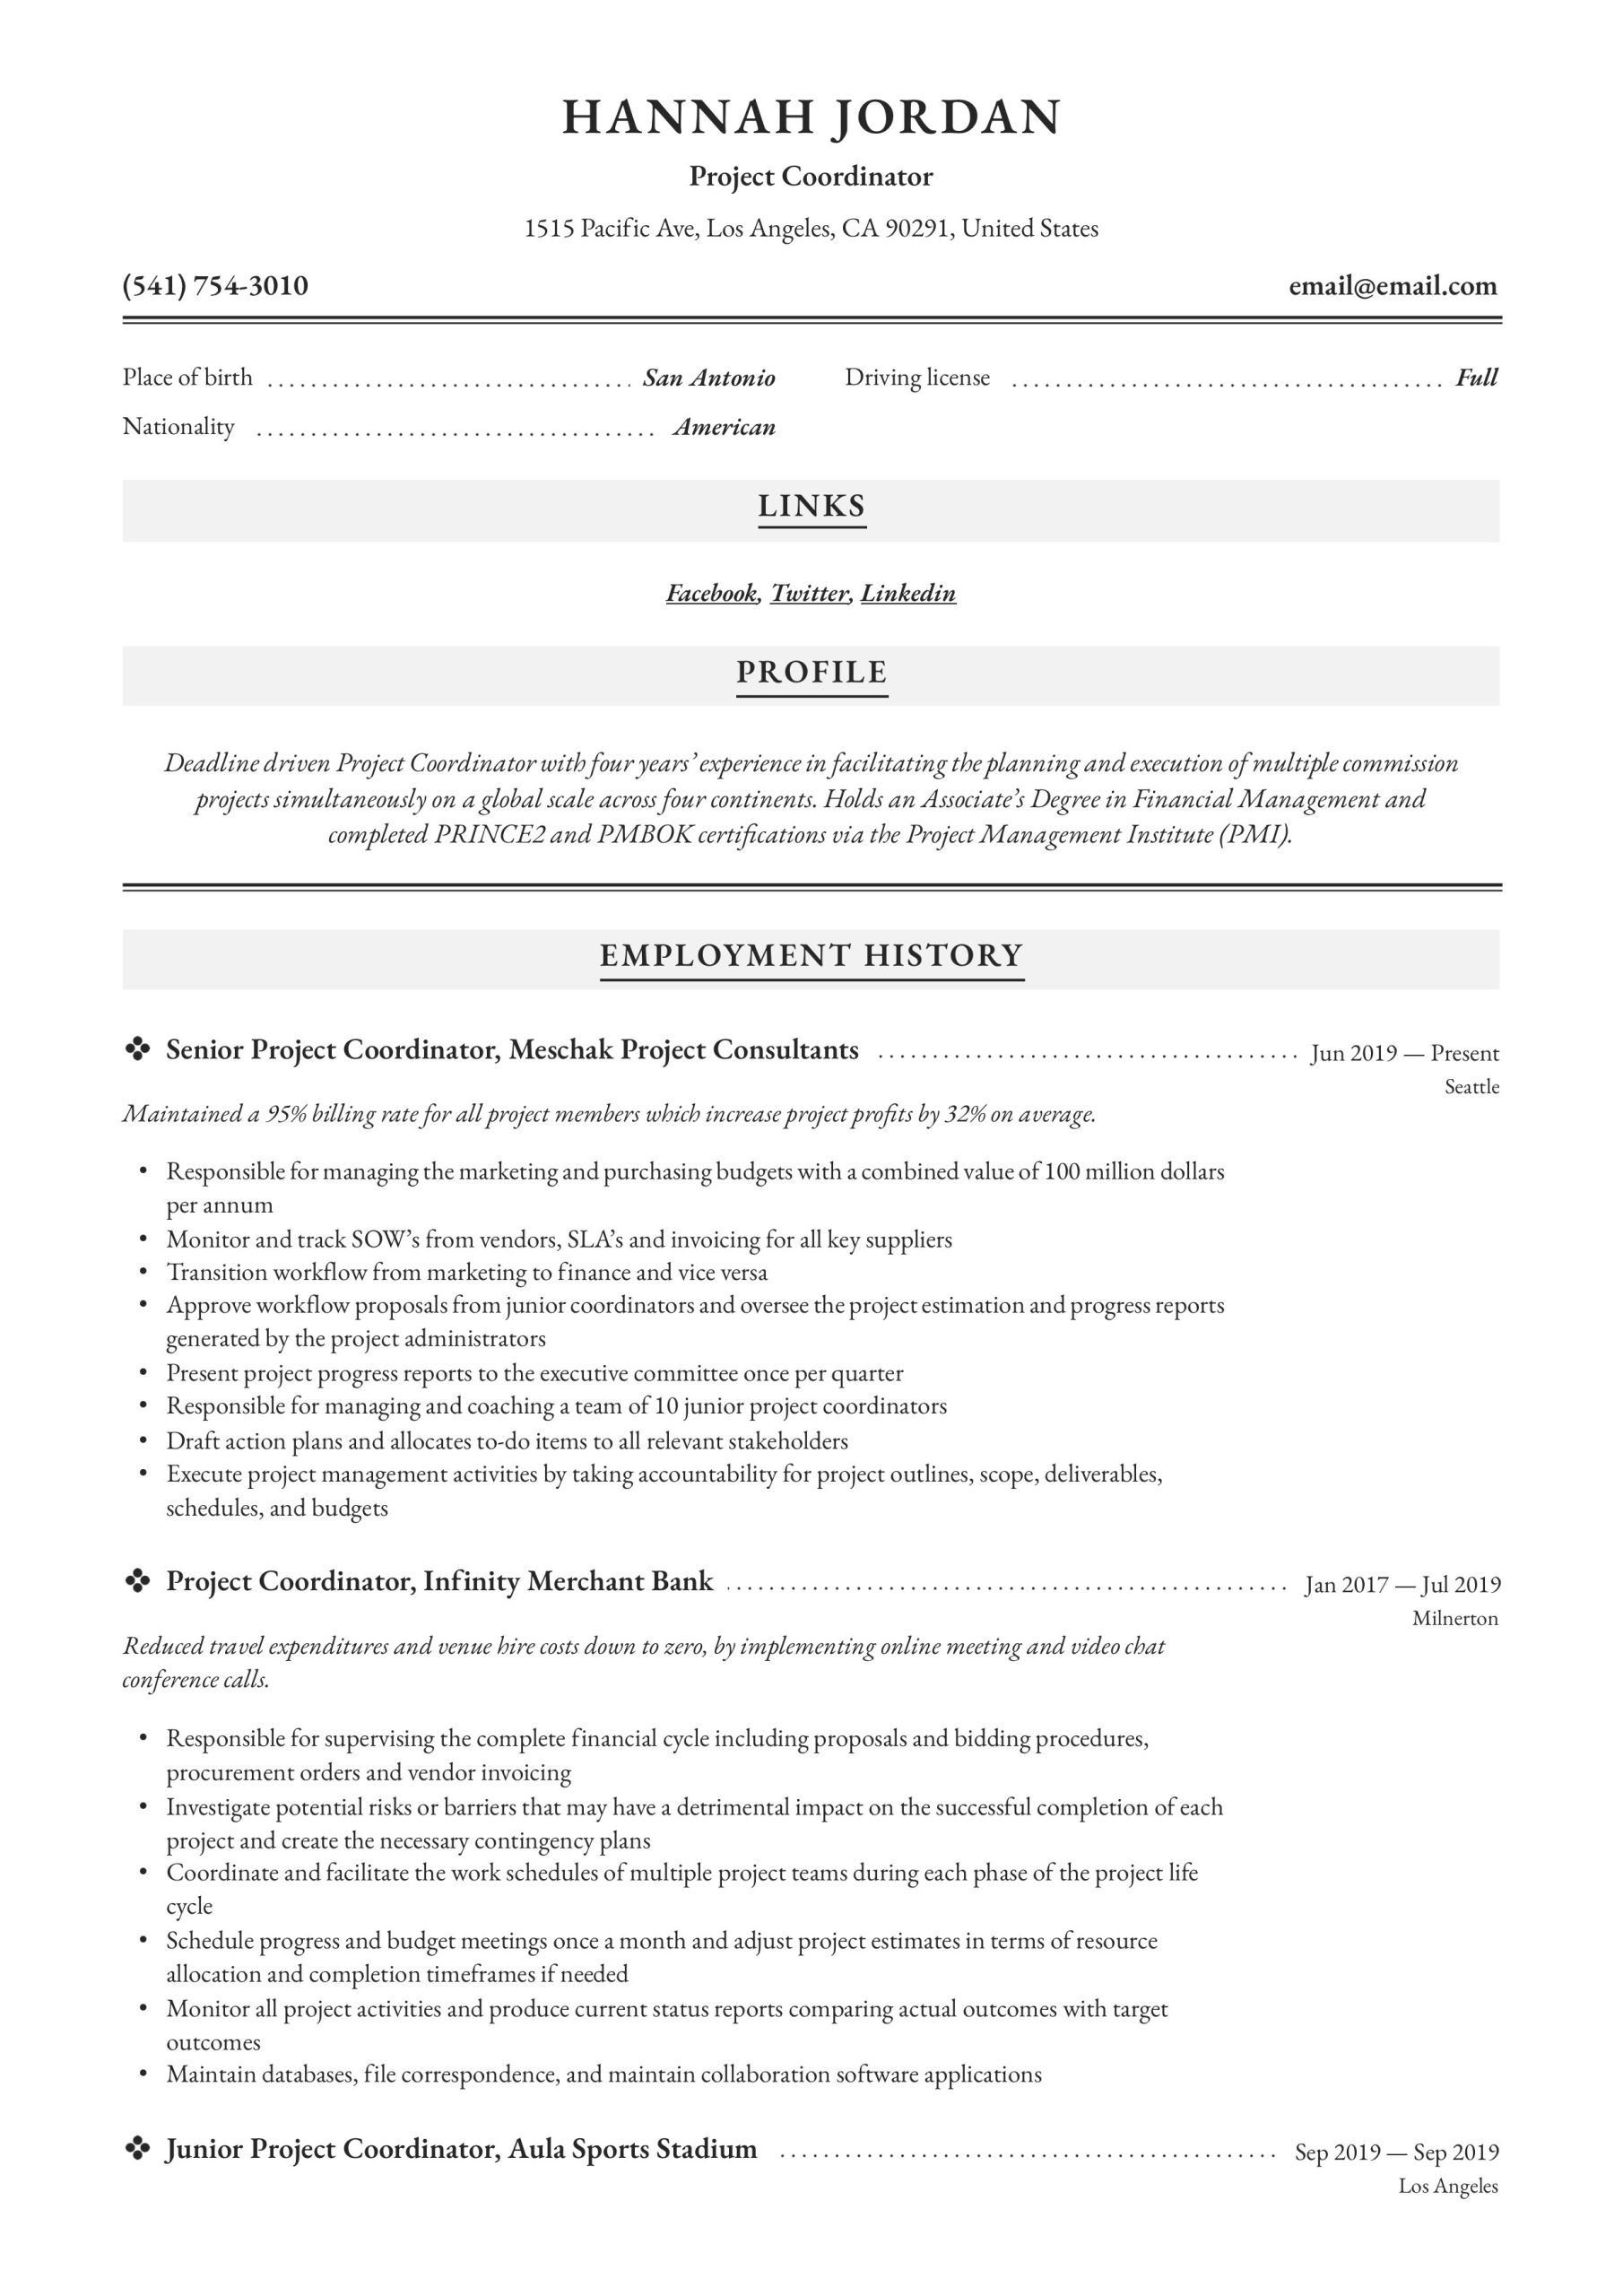 Sample Of Functional Resume for Program Coordinator Project Coordinator Resume & Writing Guide  12 Examples 2020